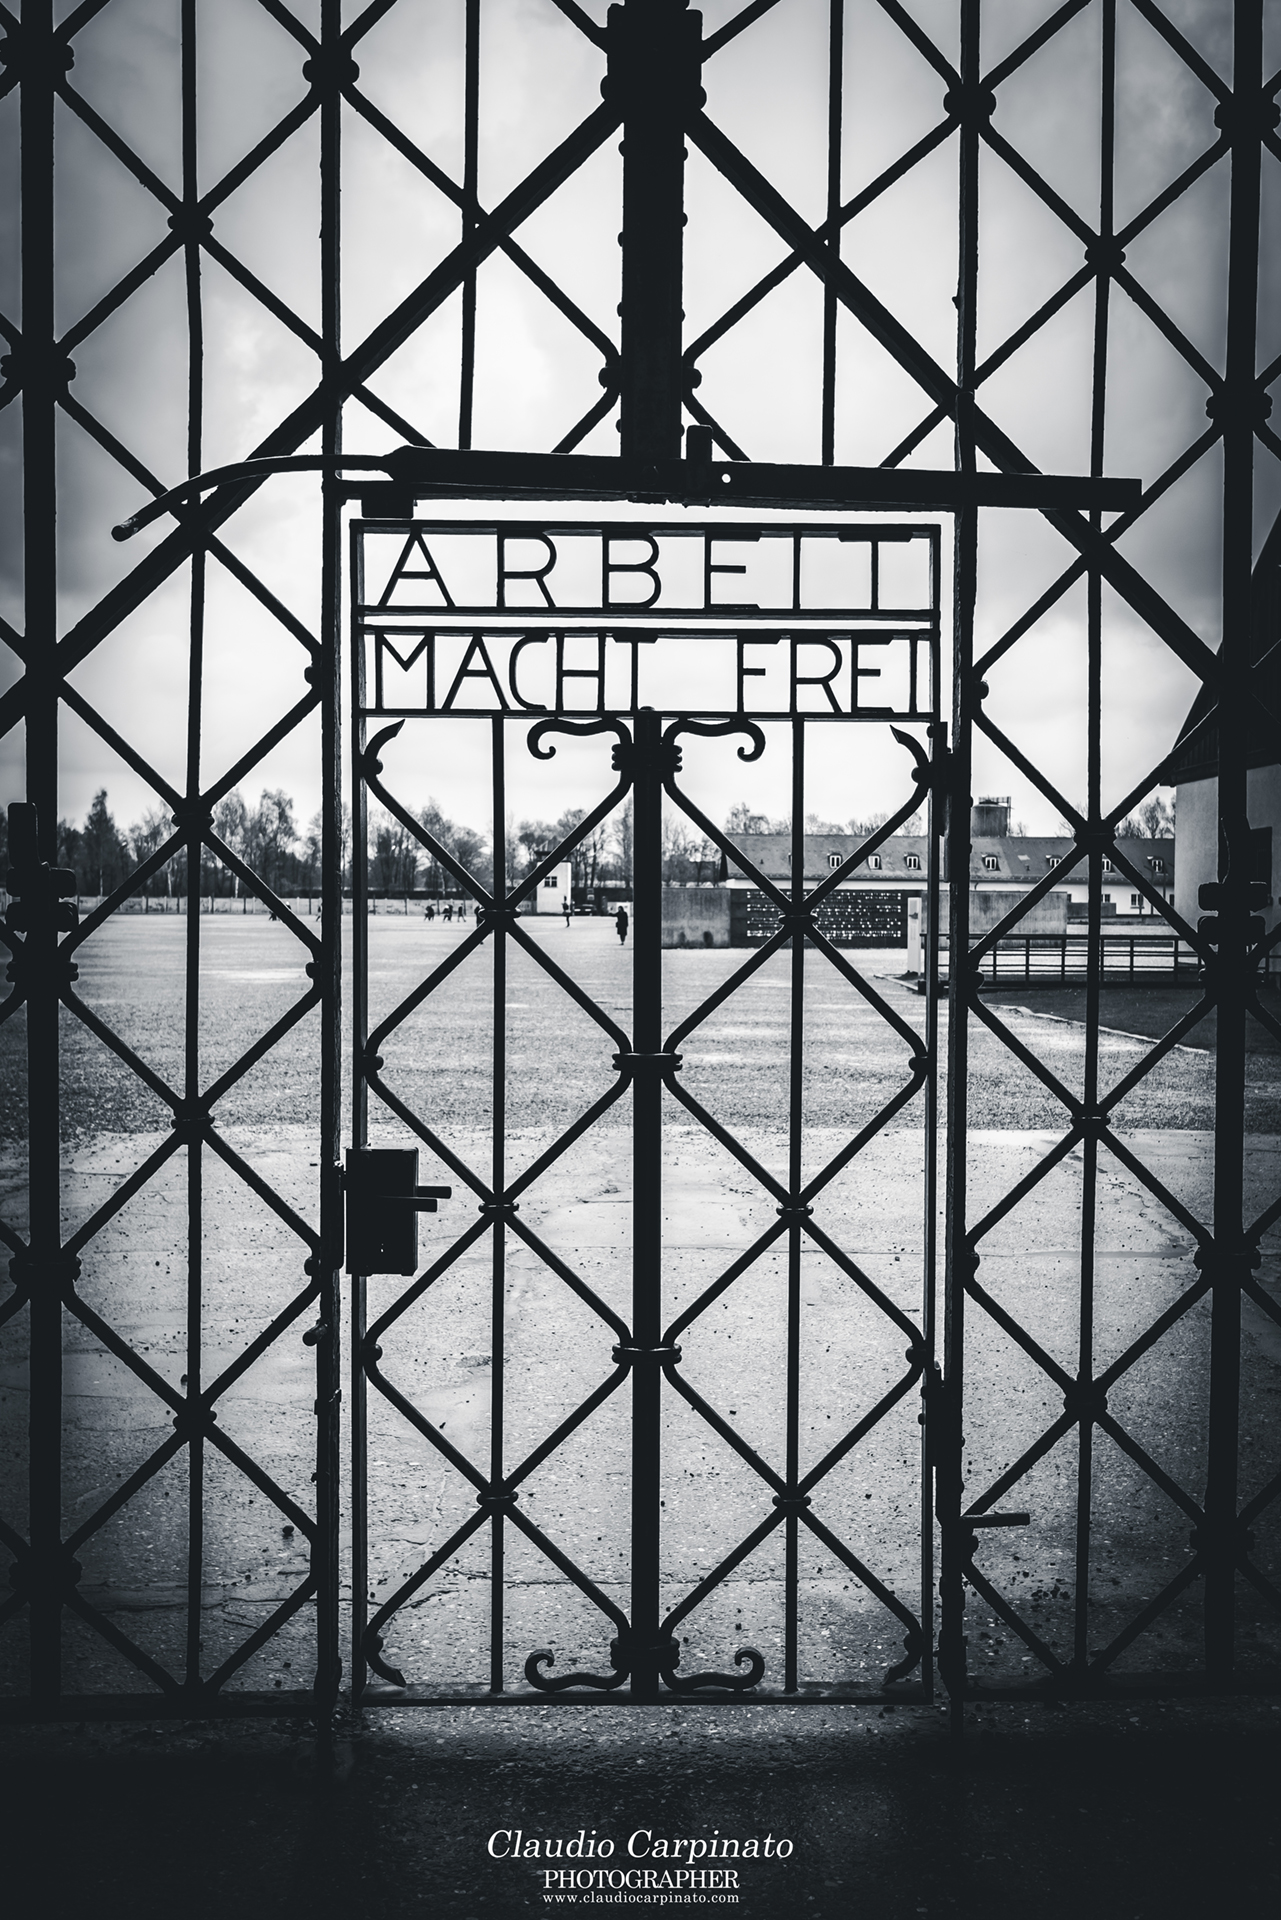 "Work Makes Free" Dachau Concentration Camp...